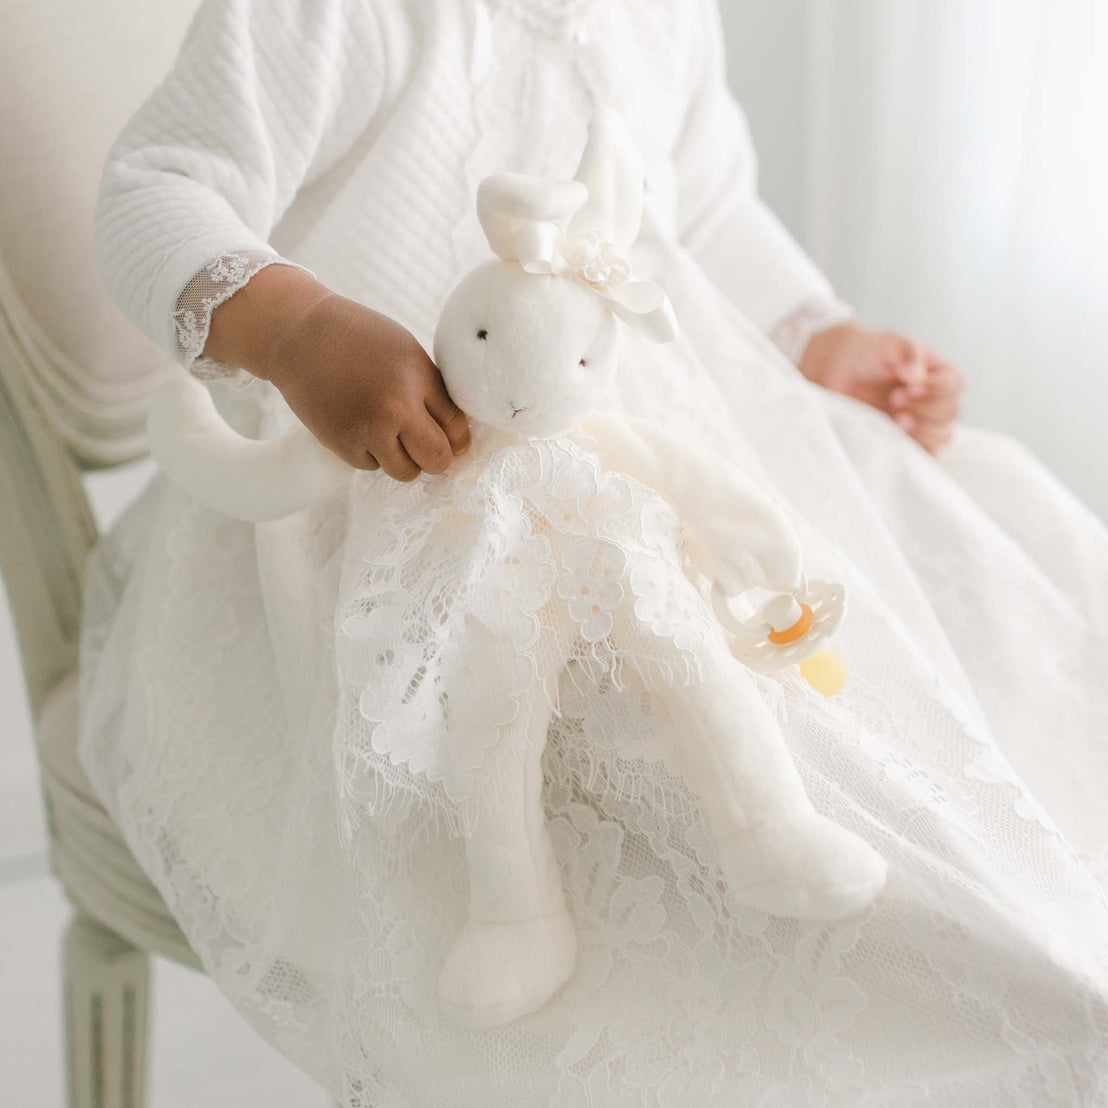 The silly bunny buddy, pictured with a baby girl wearing the Victoria Christening Gown. Baby girl is sitting on chair in photo studio.